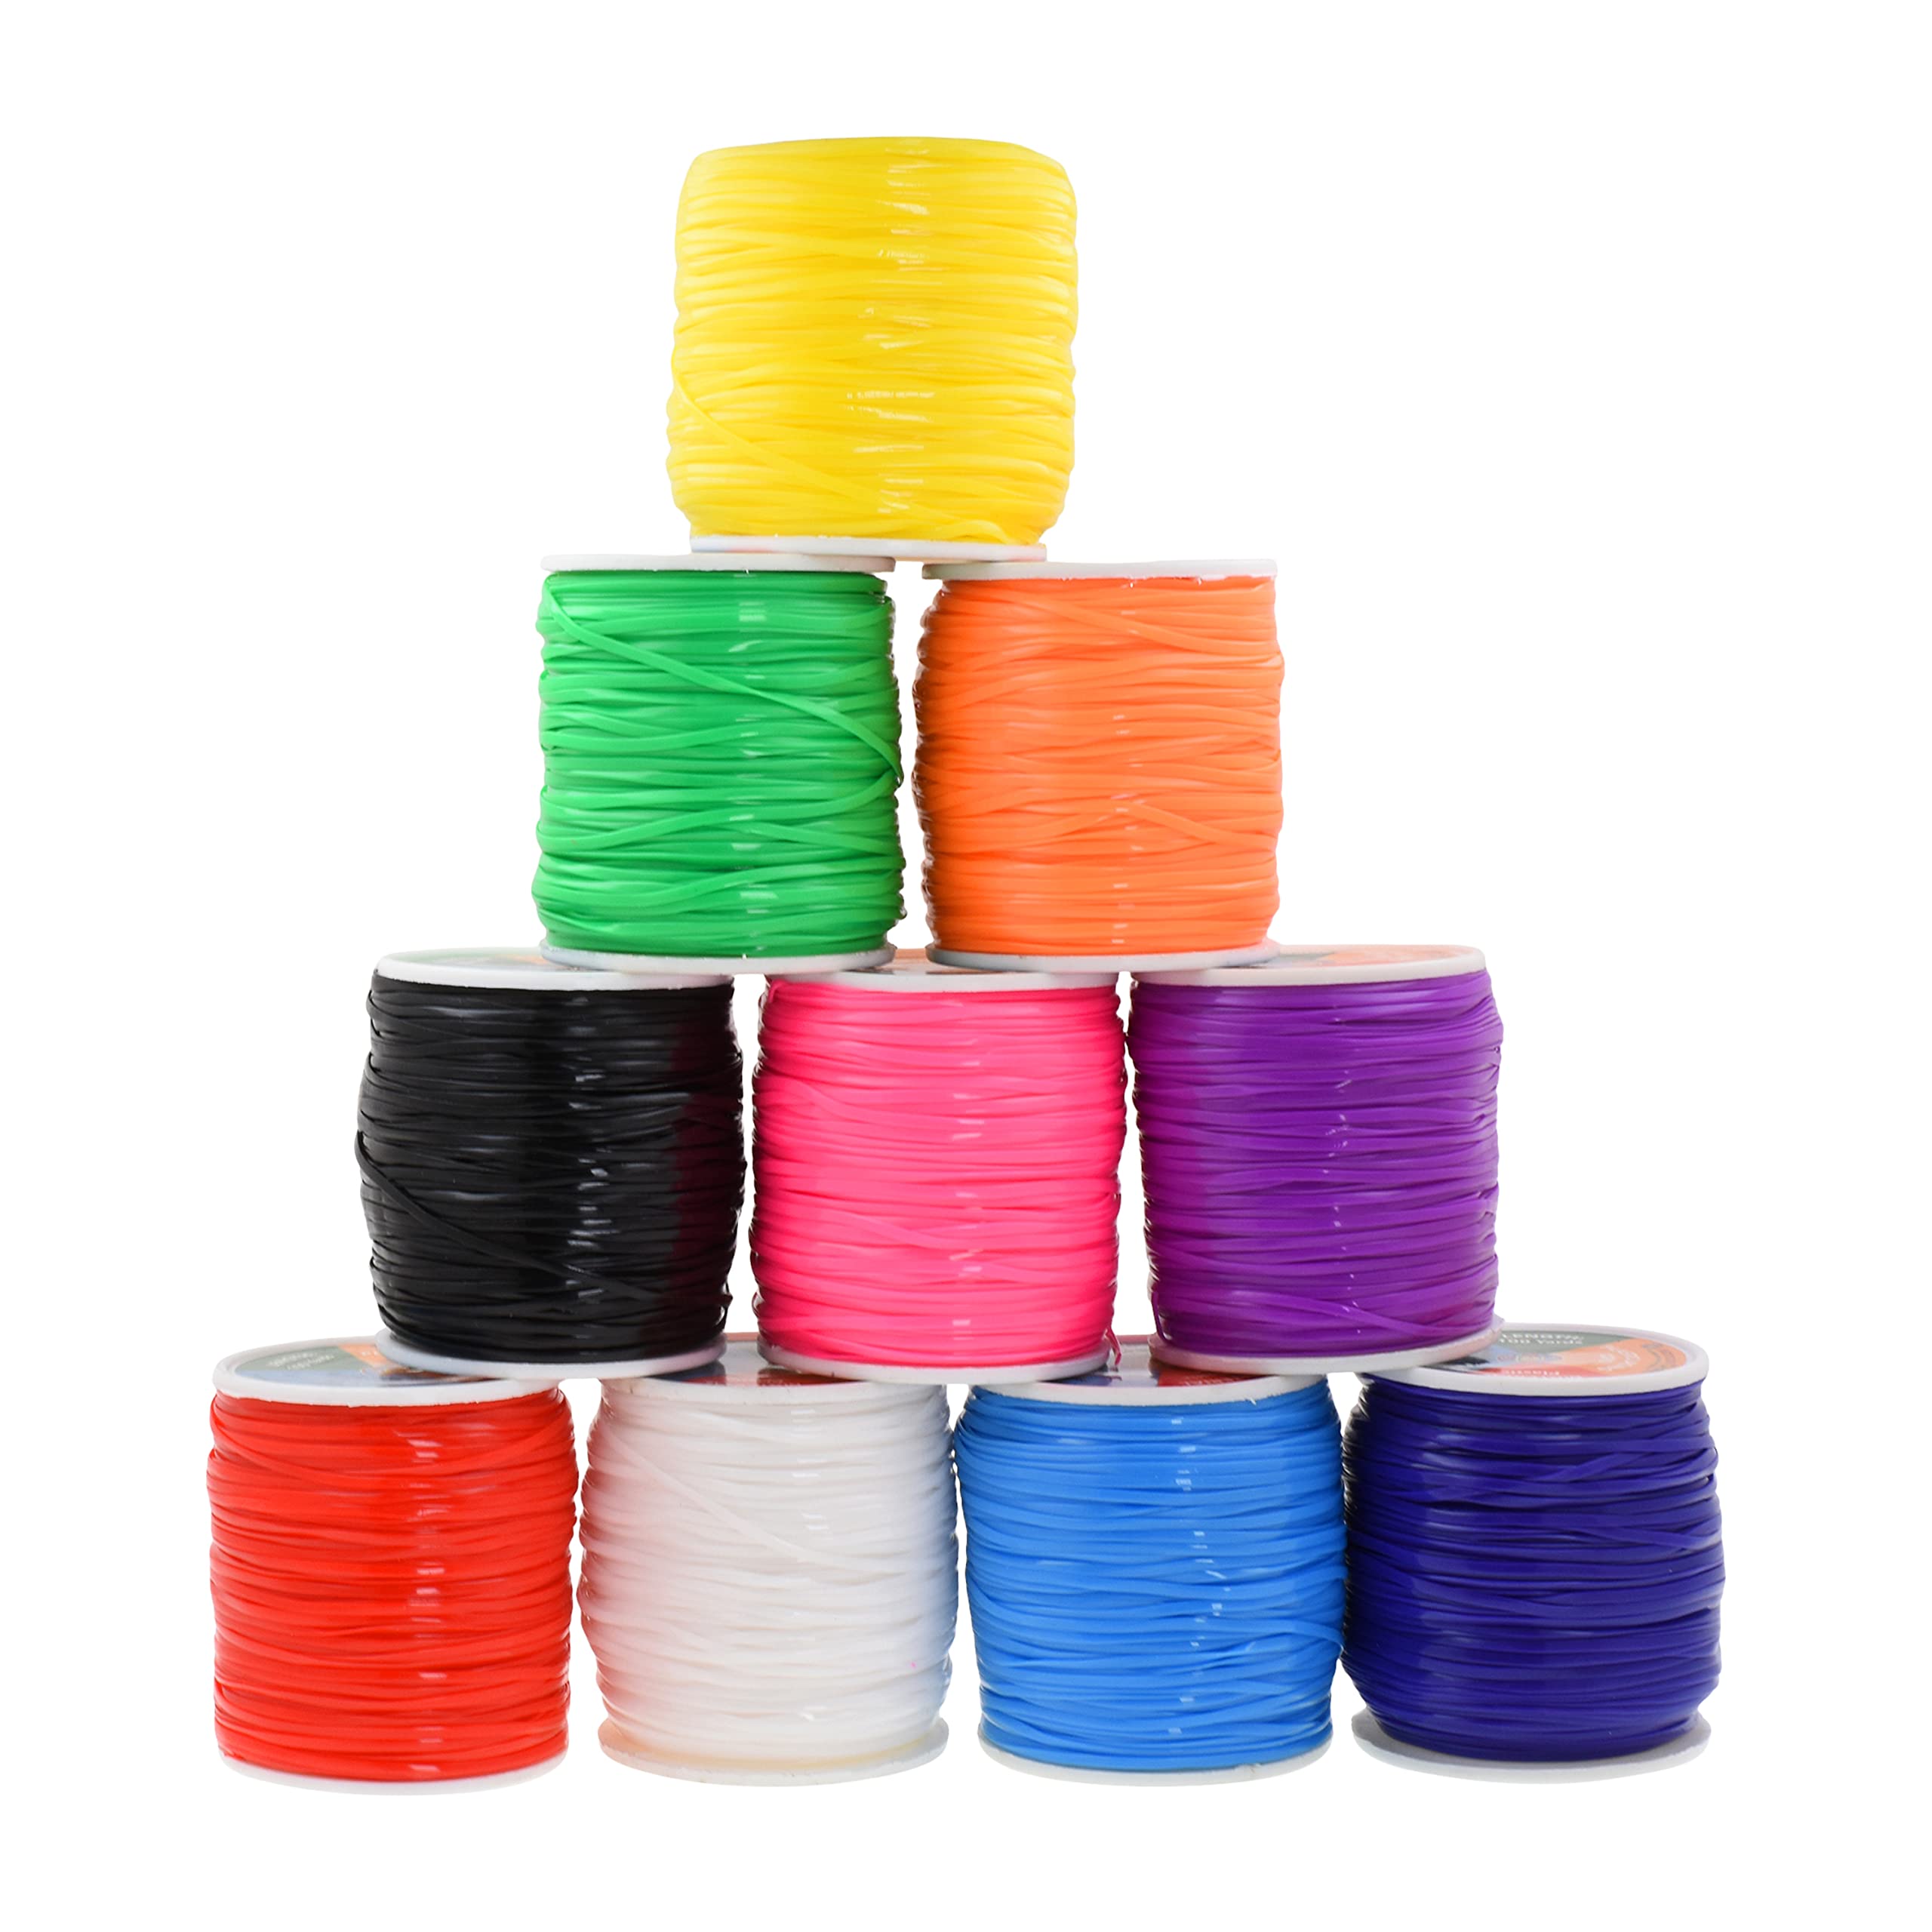 Thin Nylon String Monofilament Beading Thread for Seed Beads